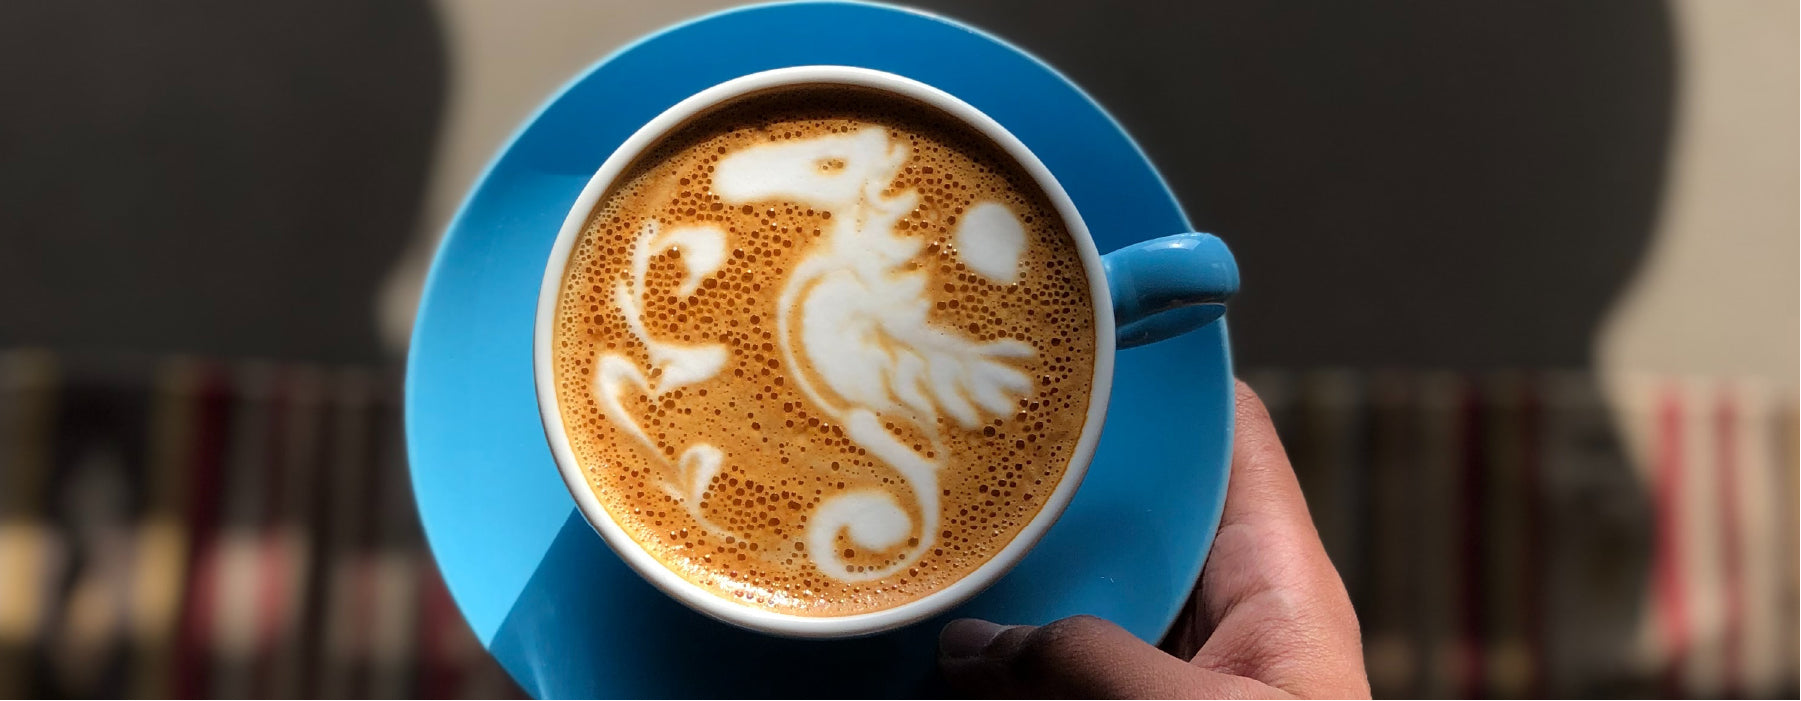 How to Make Eye-Catching Latte Art - Coffee Life by EspressoWorks